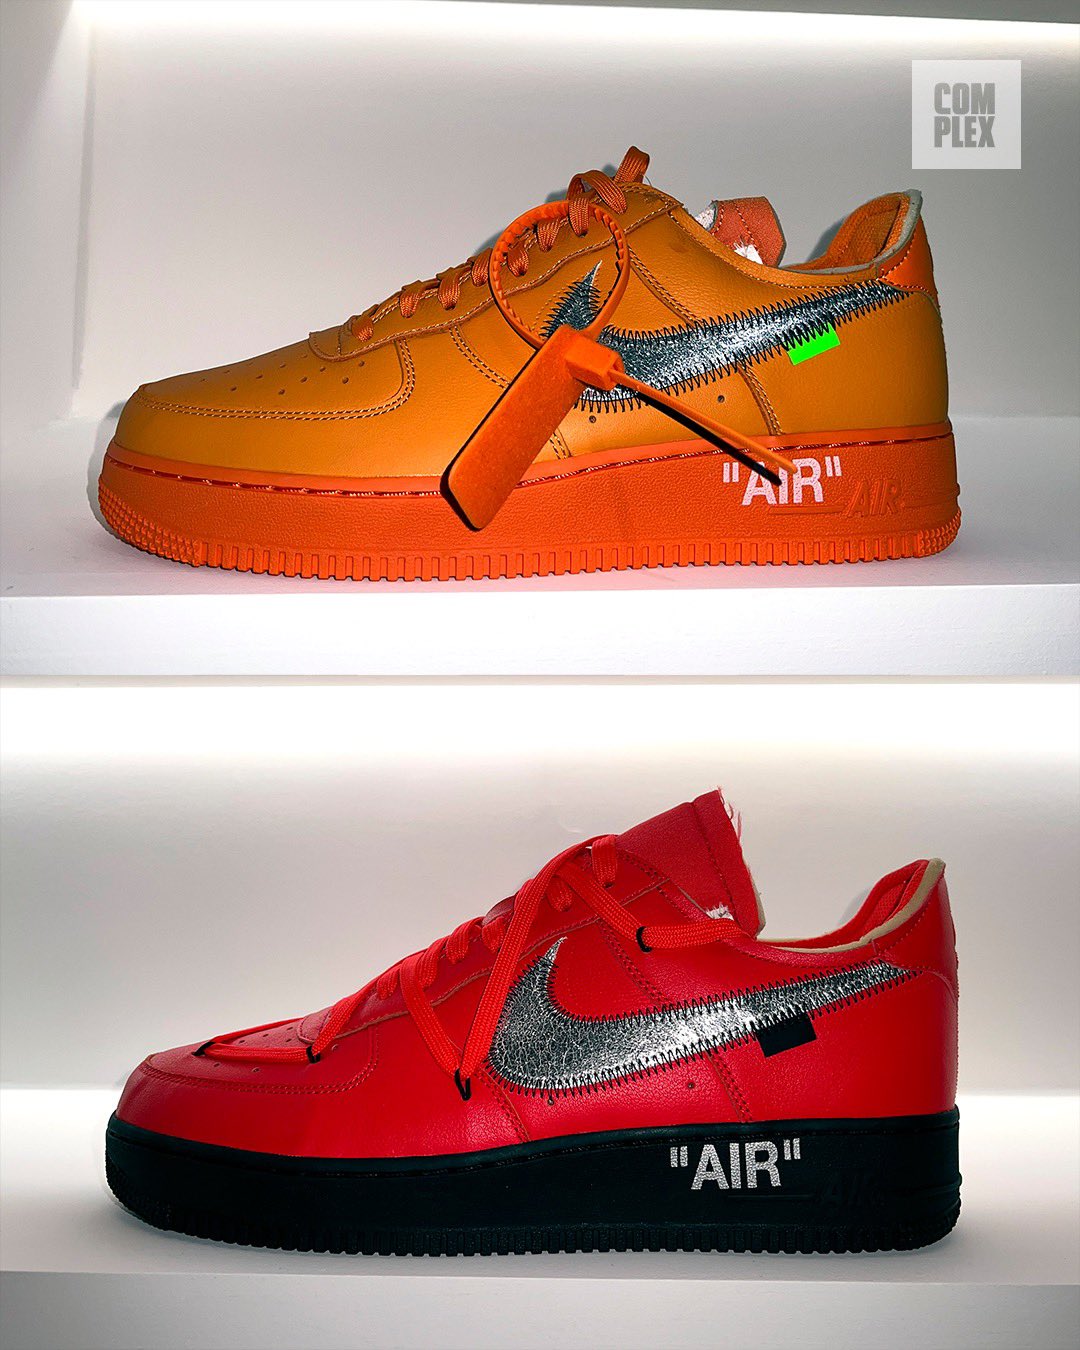 Nike and VA Securities Present Virgil Abloh: The Codes c/o Architecture -  NIKE, Inc.